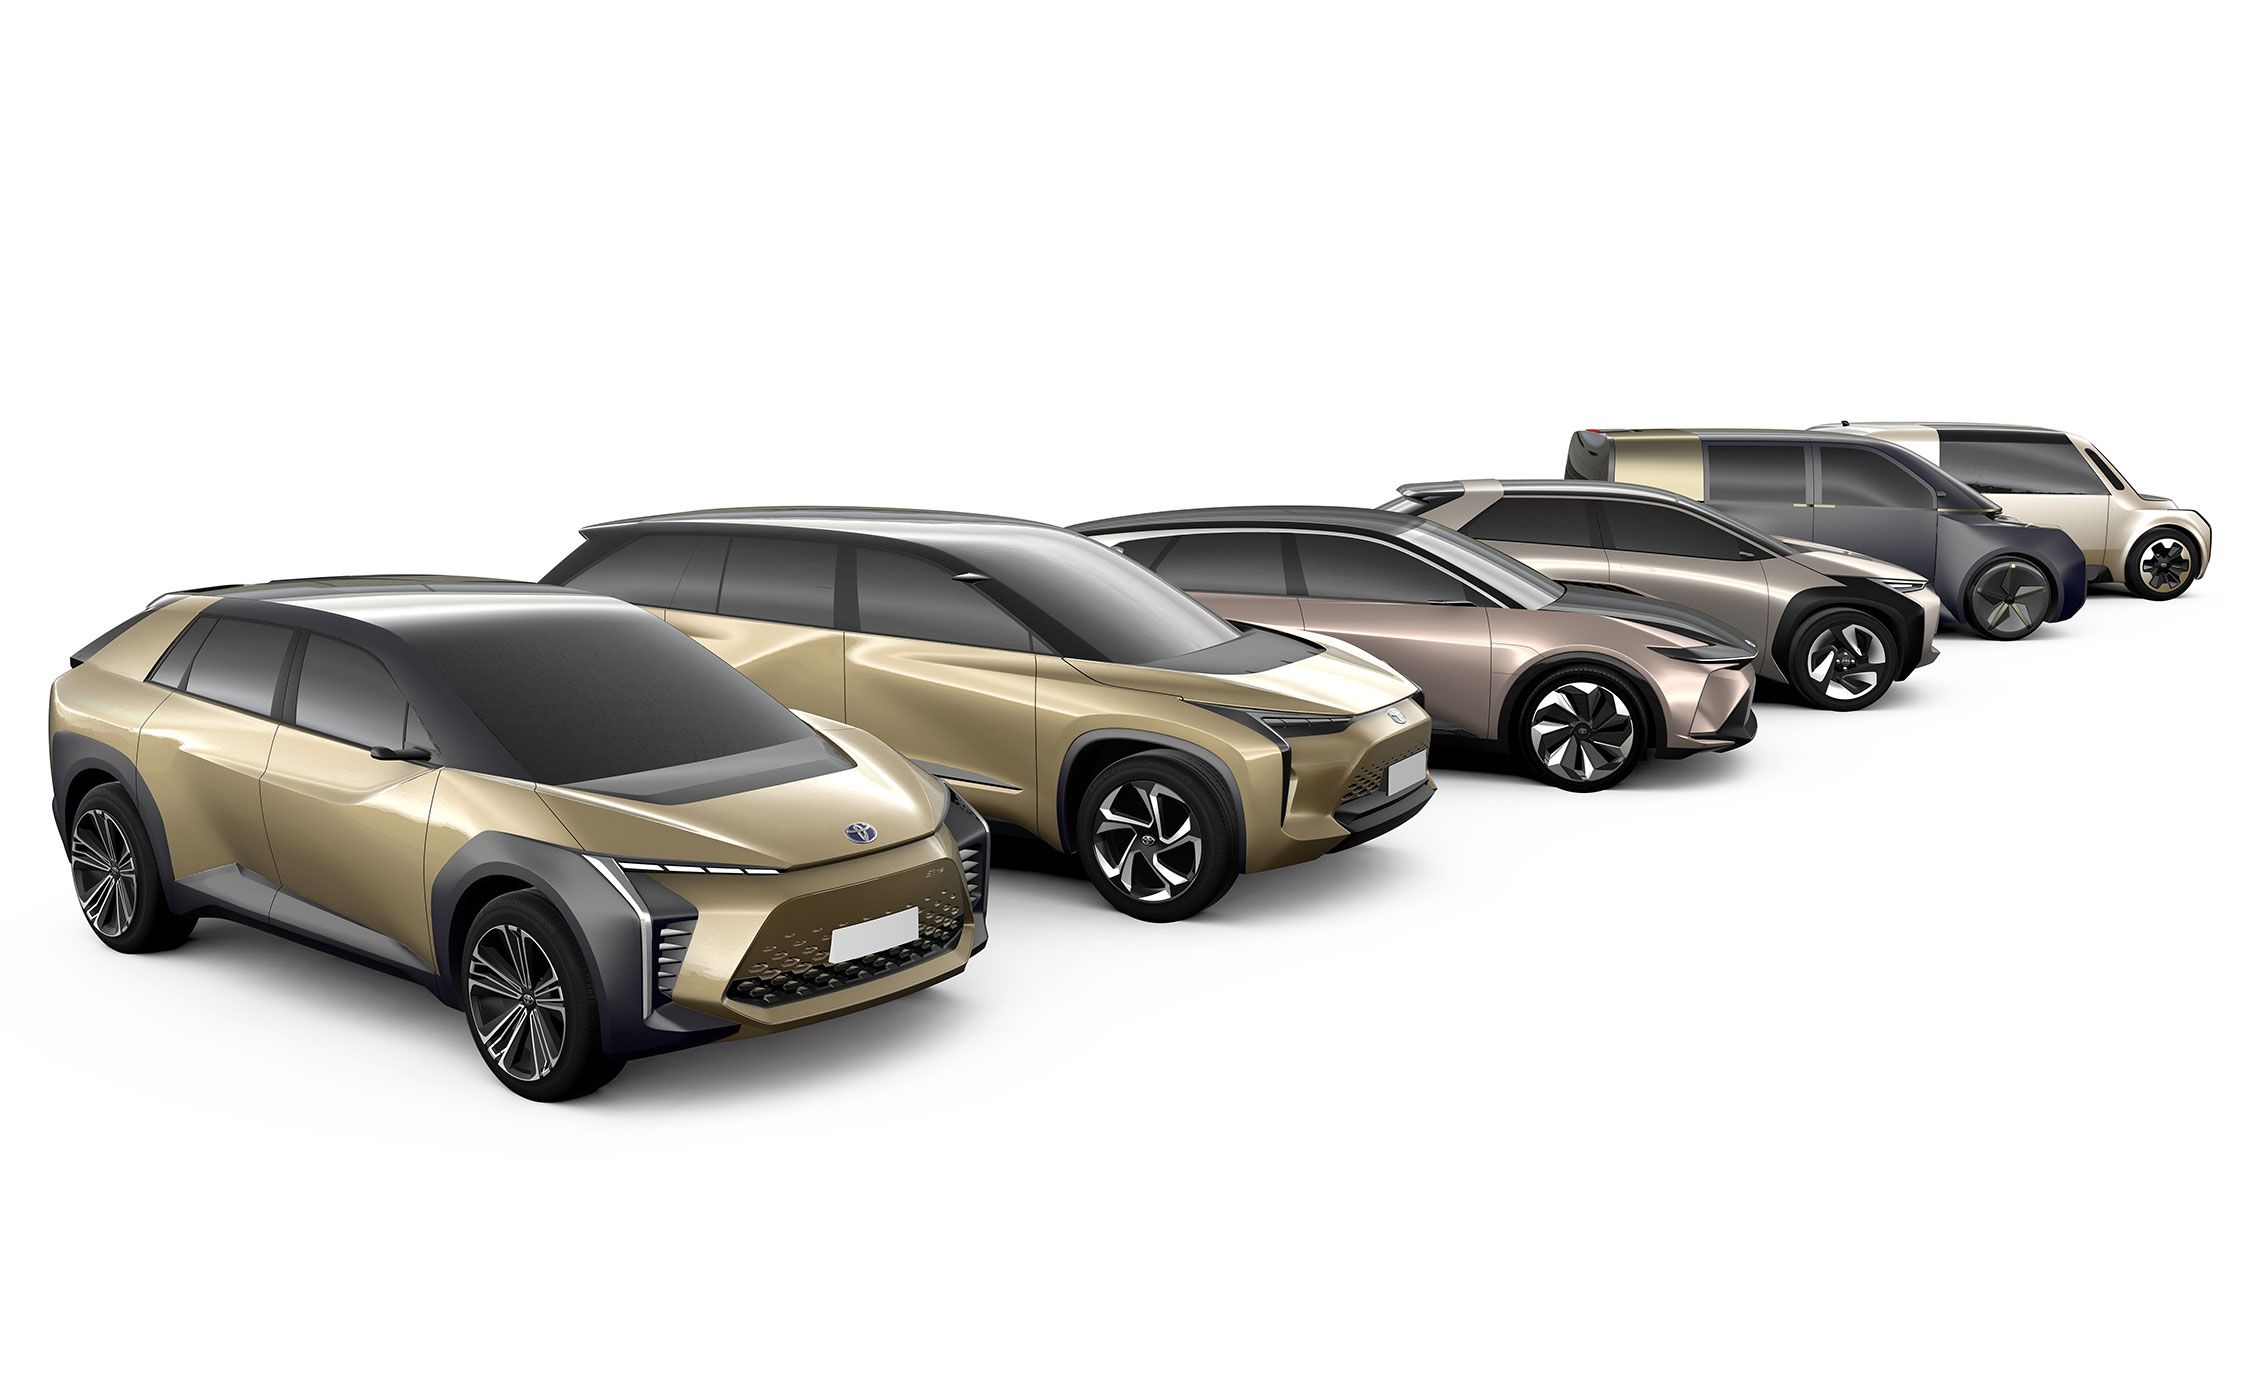 Toyota Details 6 New Ev Models Launching For 2020 2025